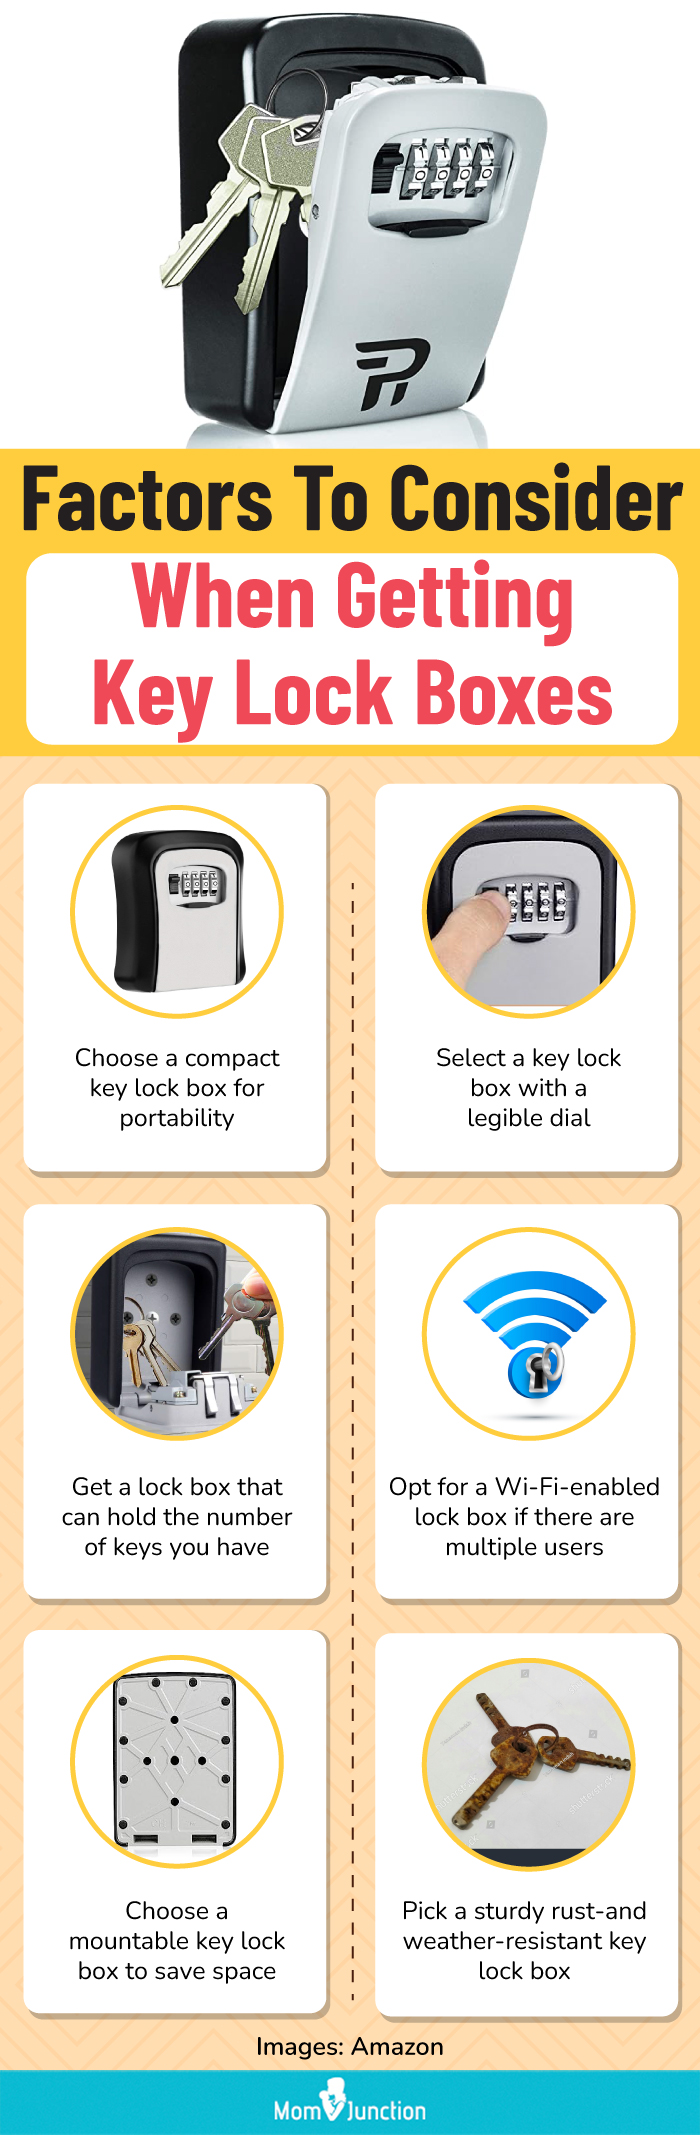 Factors To Consider When Getting Key Lock Boxes (infographic)